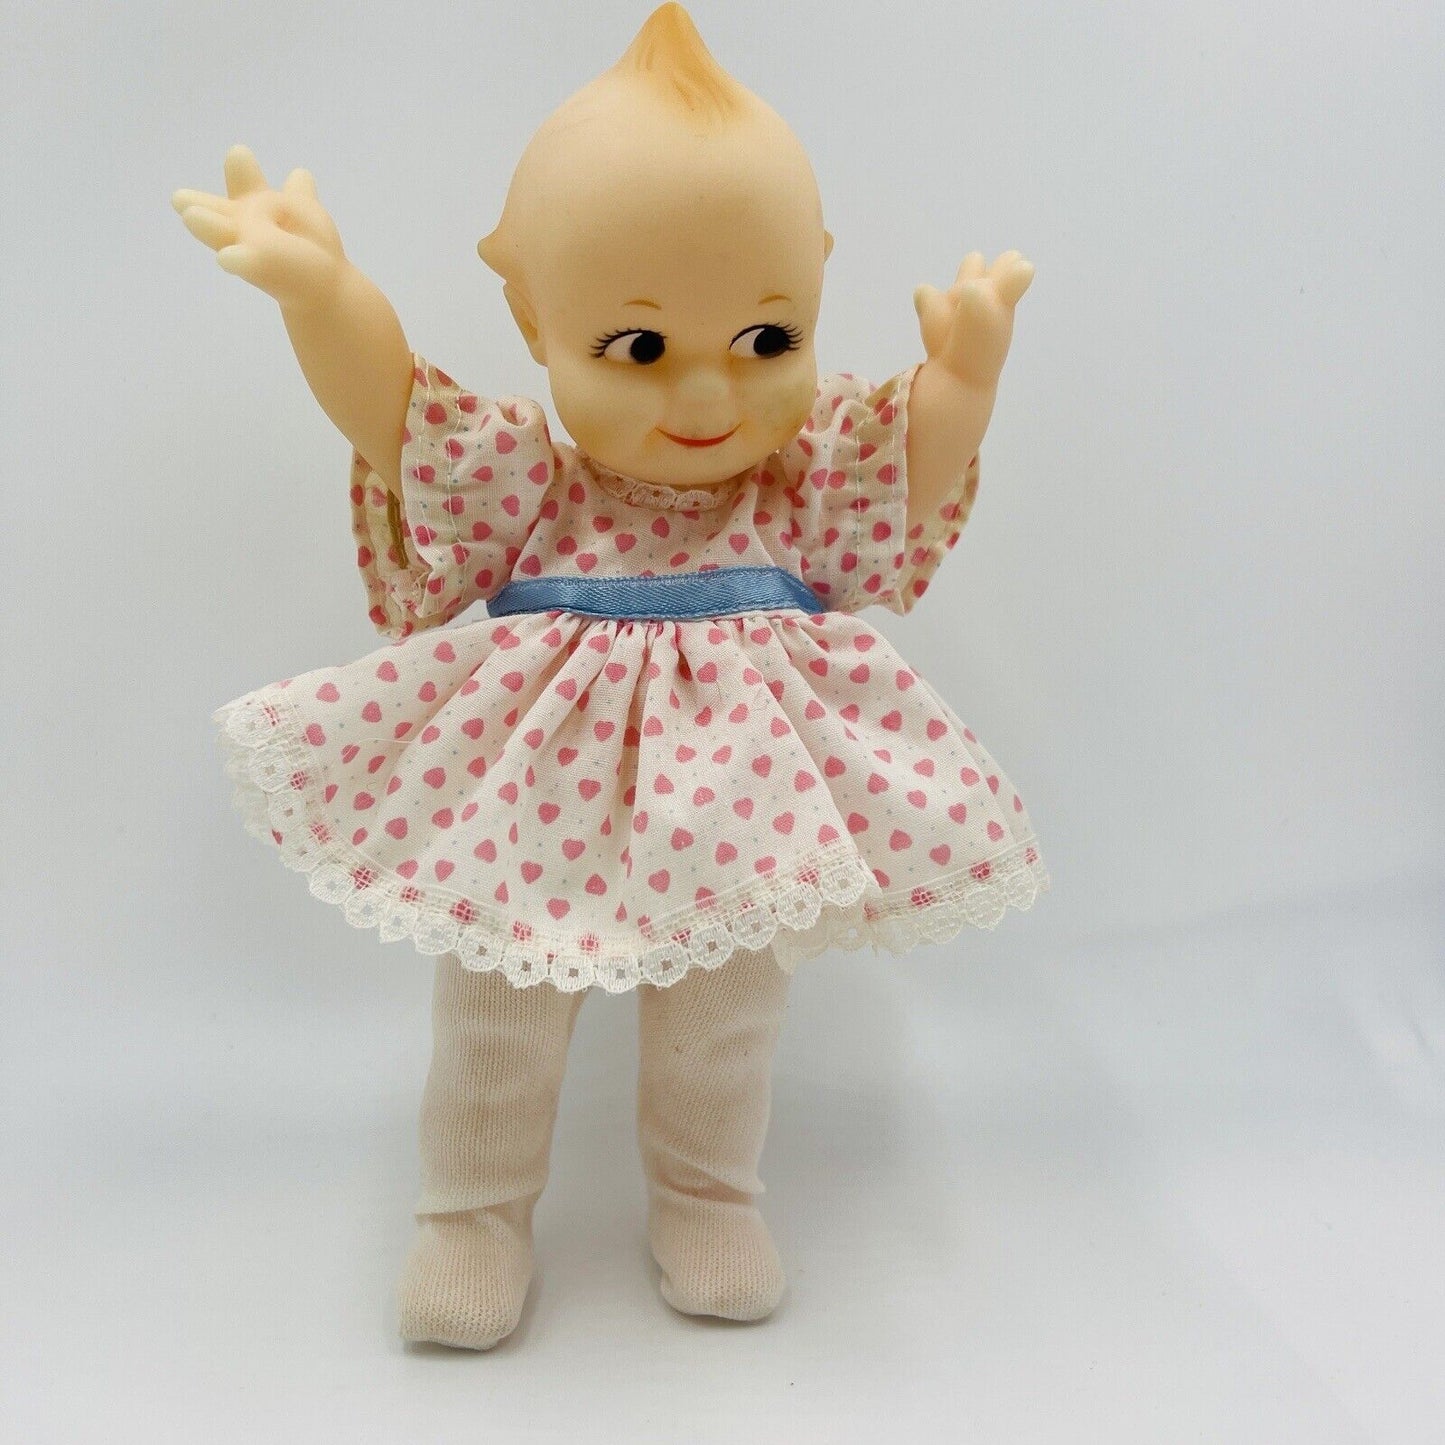 Kewpie Cameo Baby Doll by Jesco Toys Vintage 1964 Toy